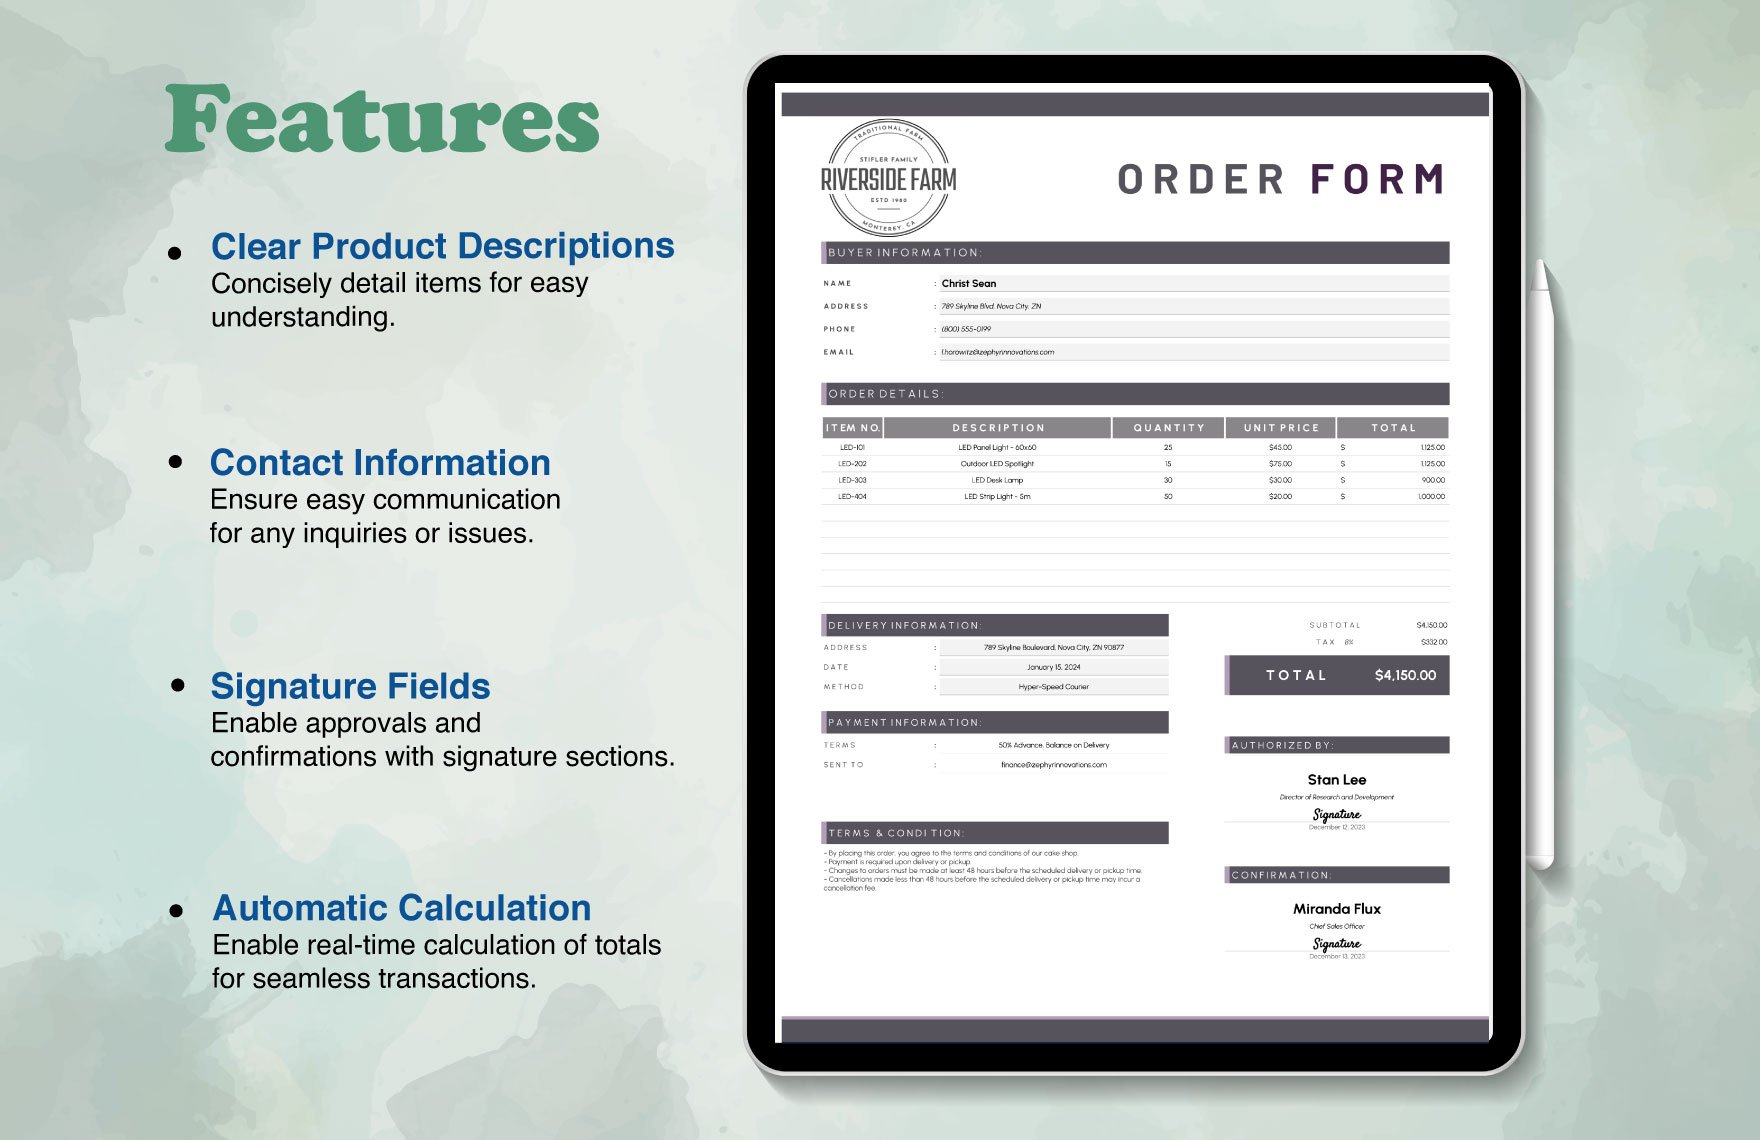 Order Forms for Small Business Template